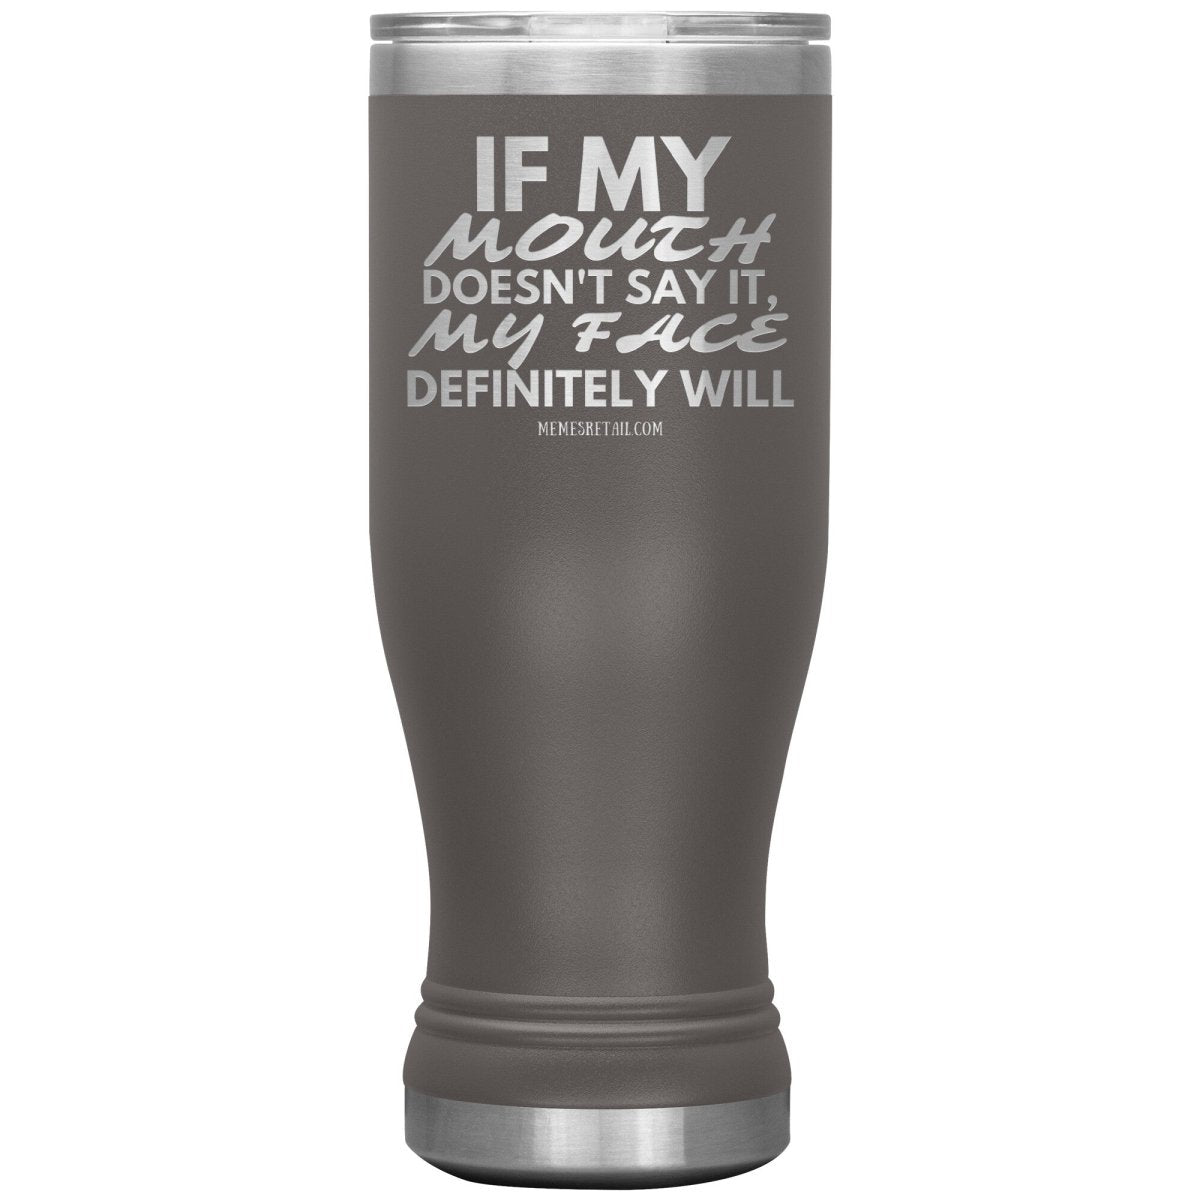 If my mouth doesn't say it, my face definitely will Tumblers, 20oz BOHO Insulated Tumbler / Pewter - MemesRetail.com